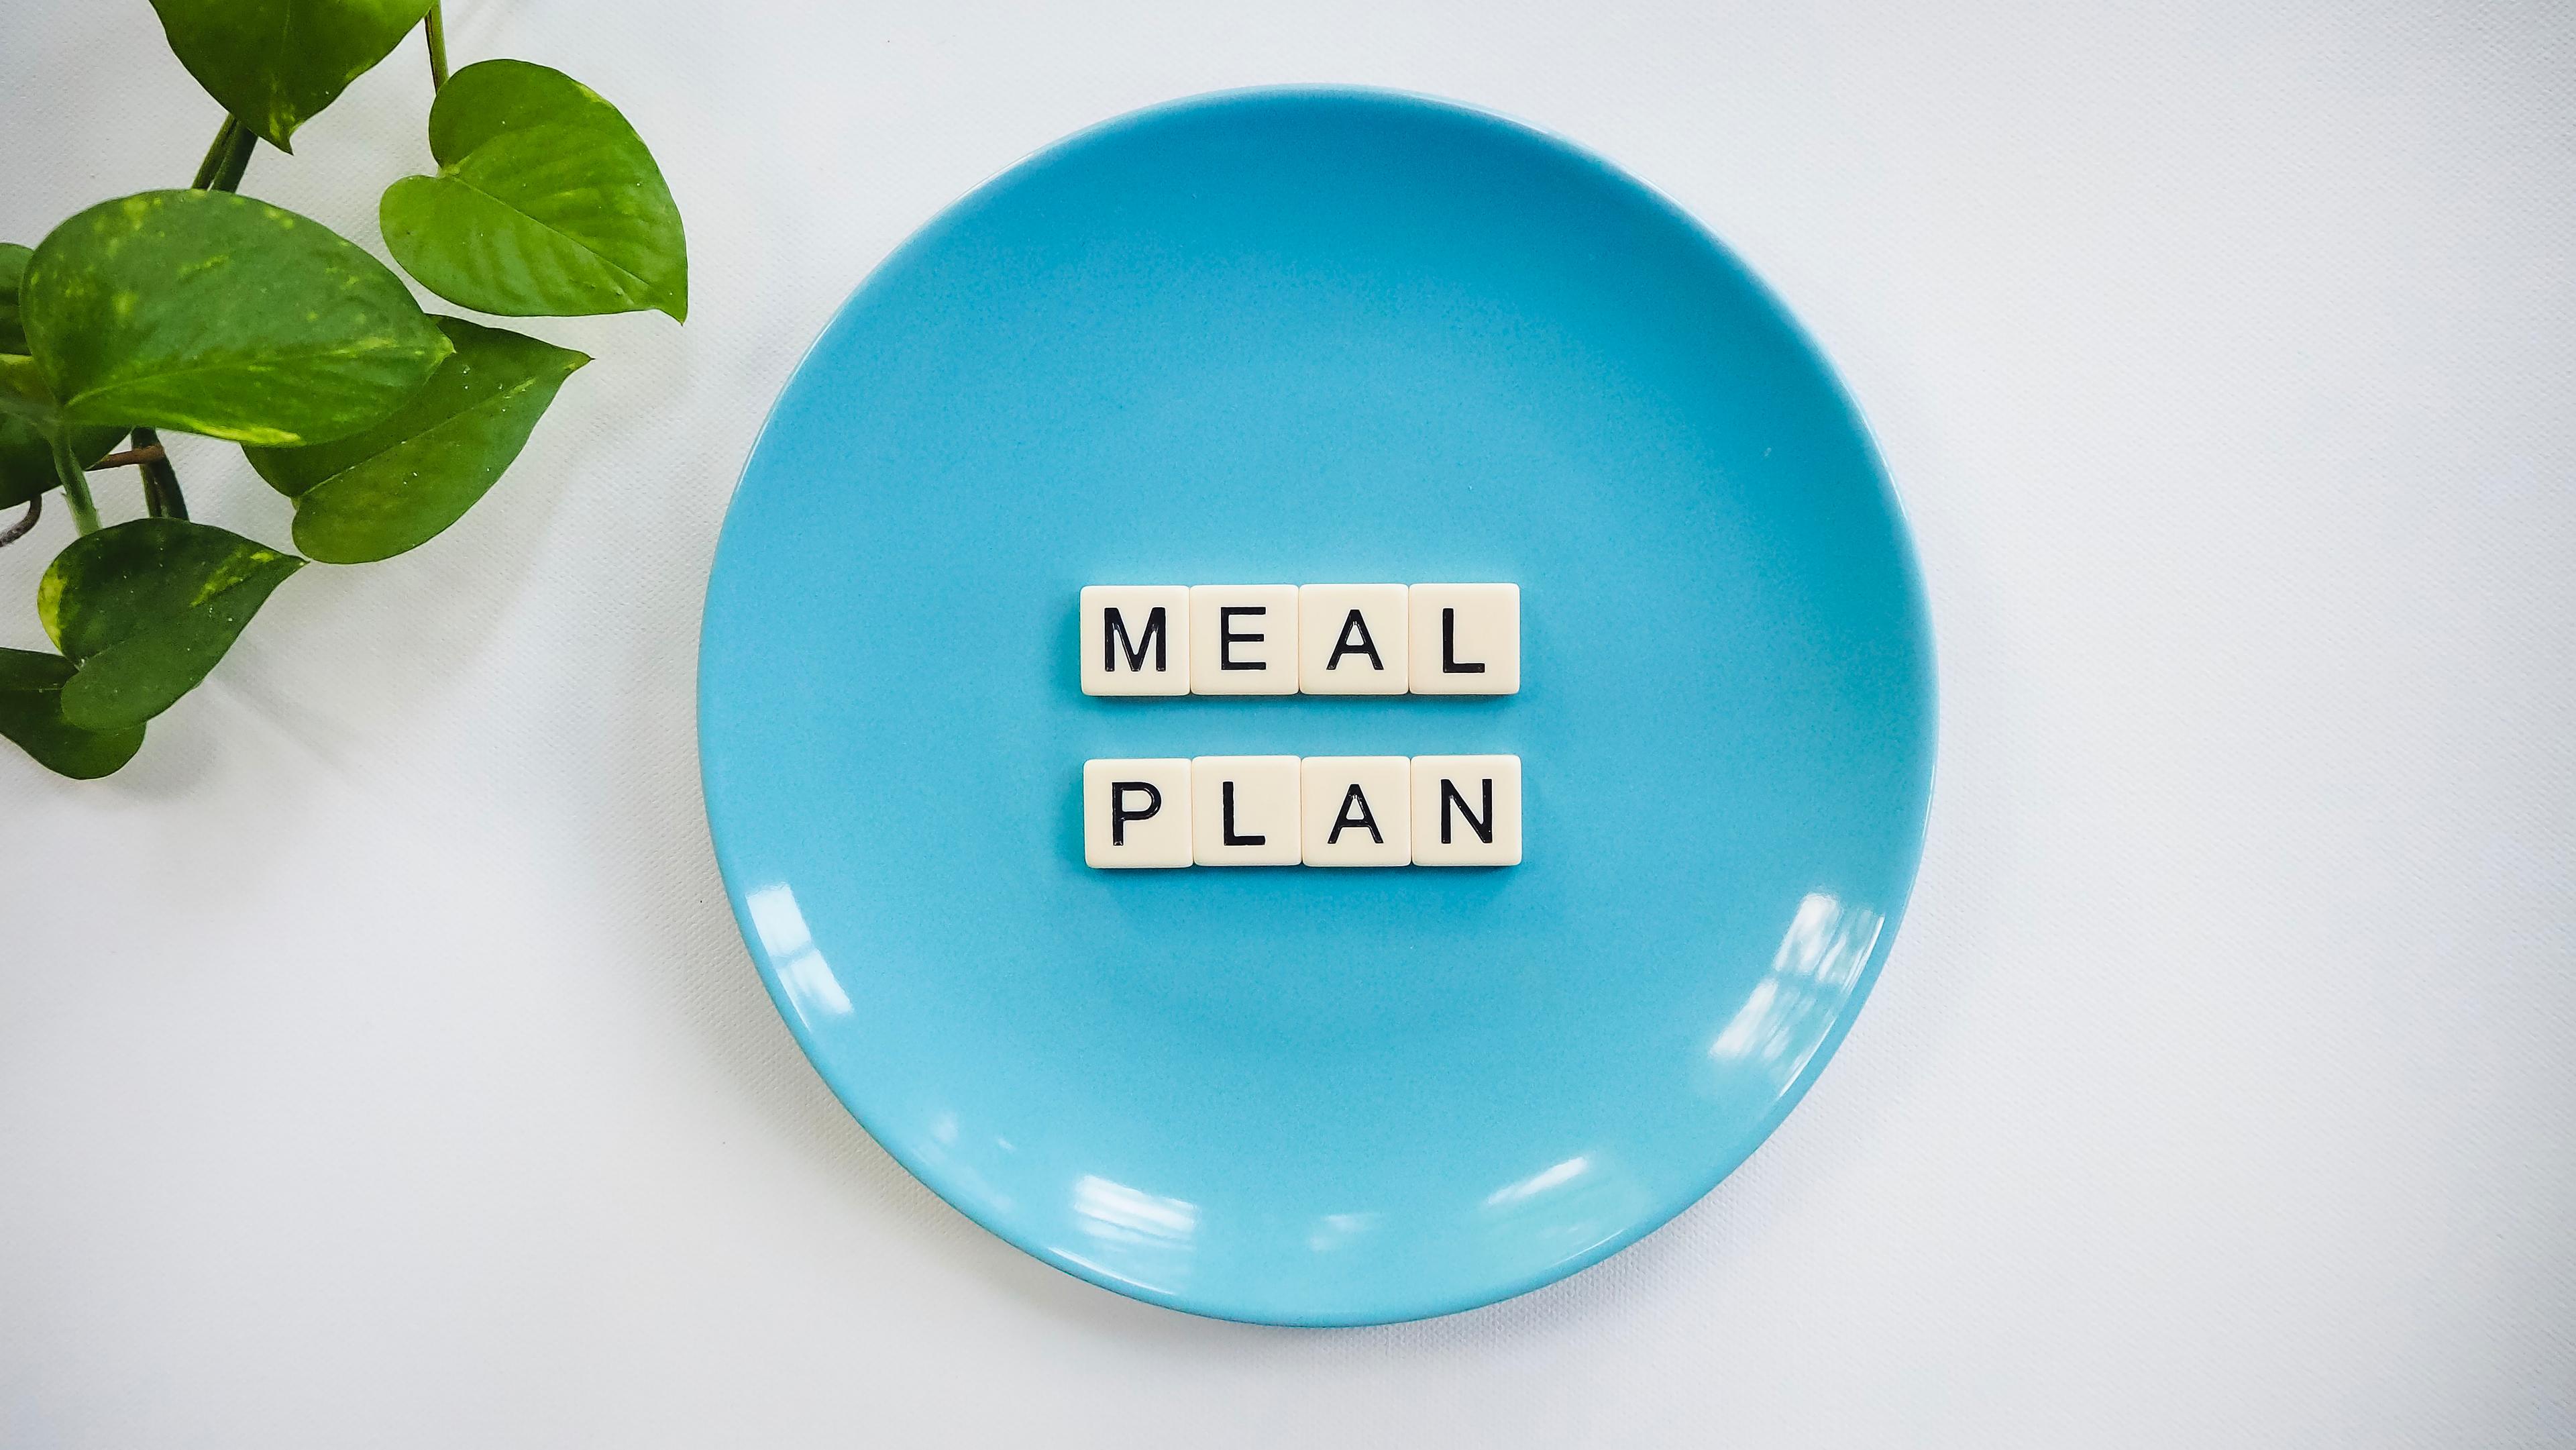 A blue plate with the words "Meal Plan" on it in tiles